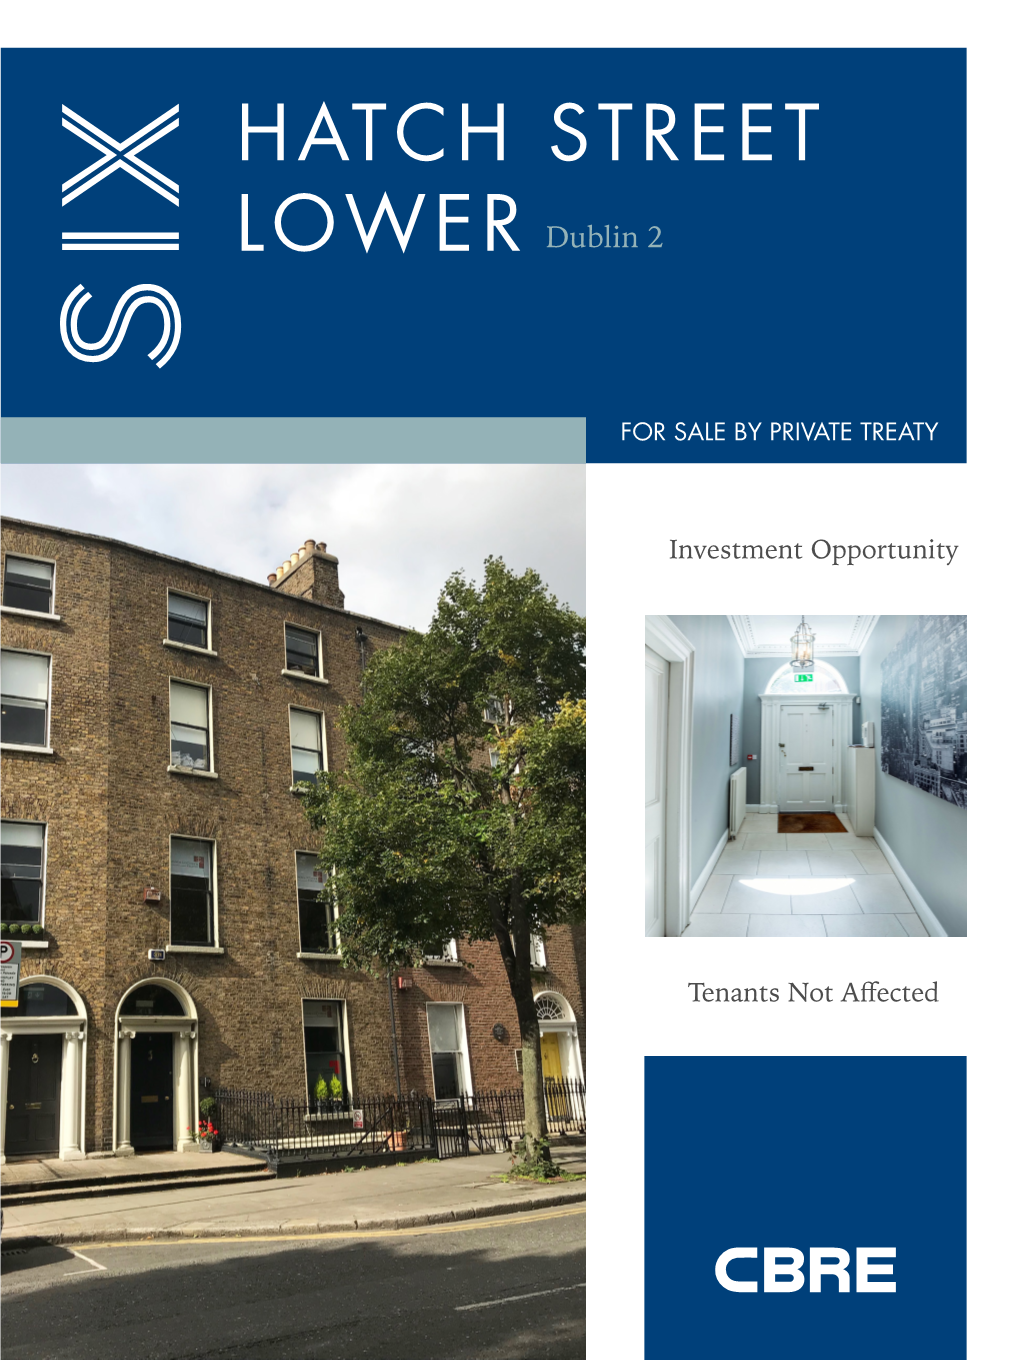 HATCH STREET LOWER Dublin 2 for SALEBYPRIVATE TREATY Investment Opportunity Tenants Notaffected